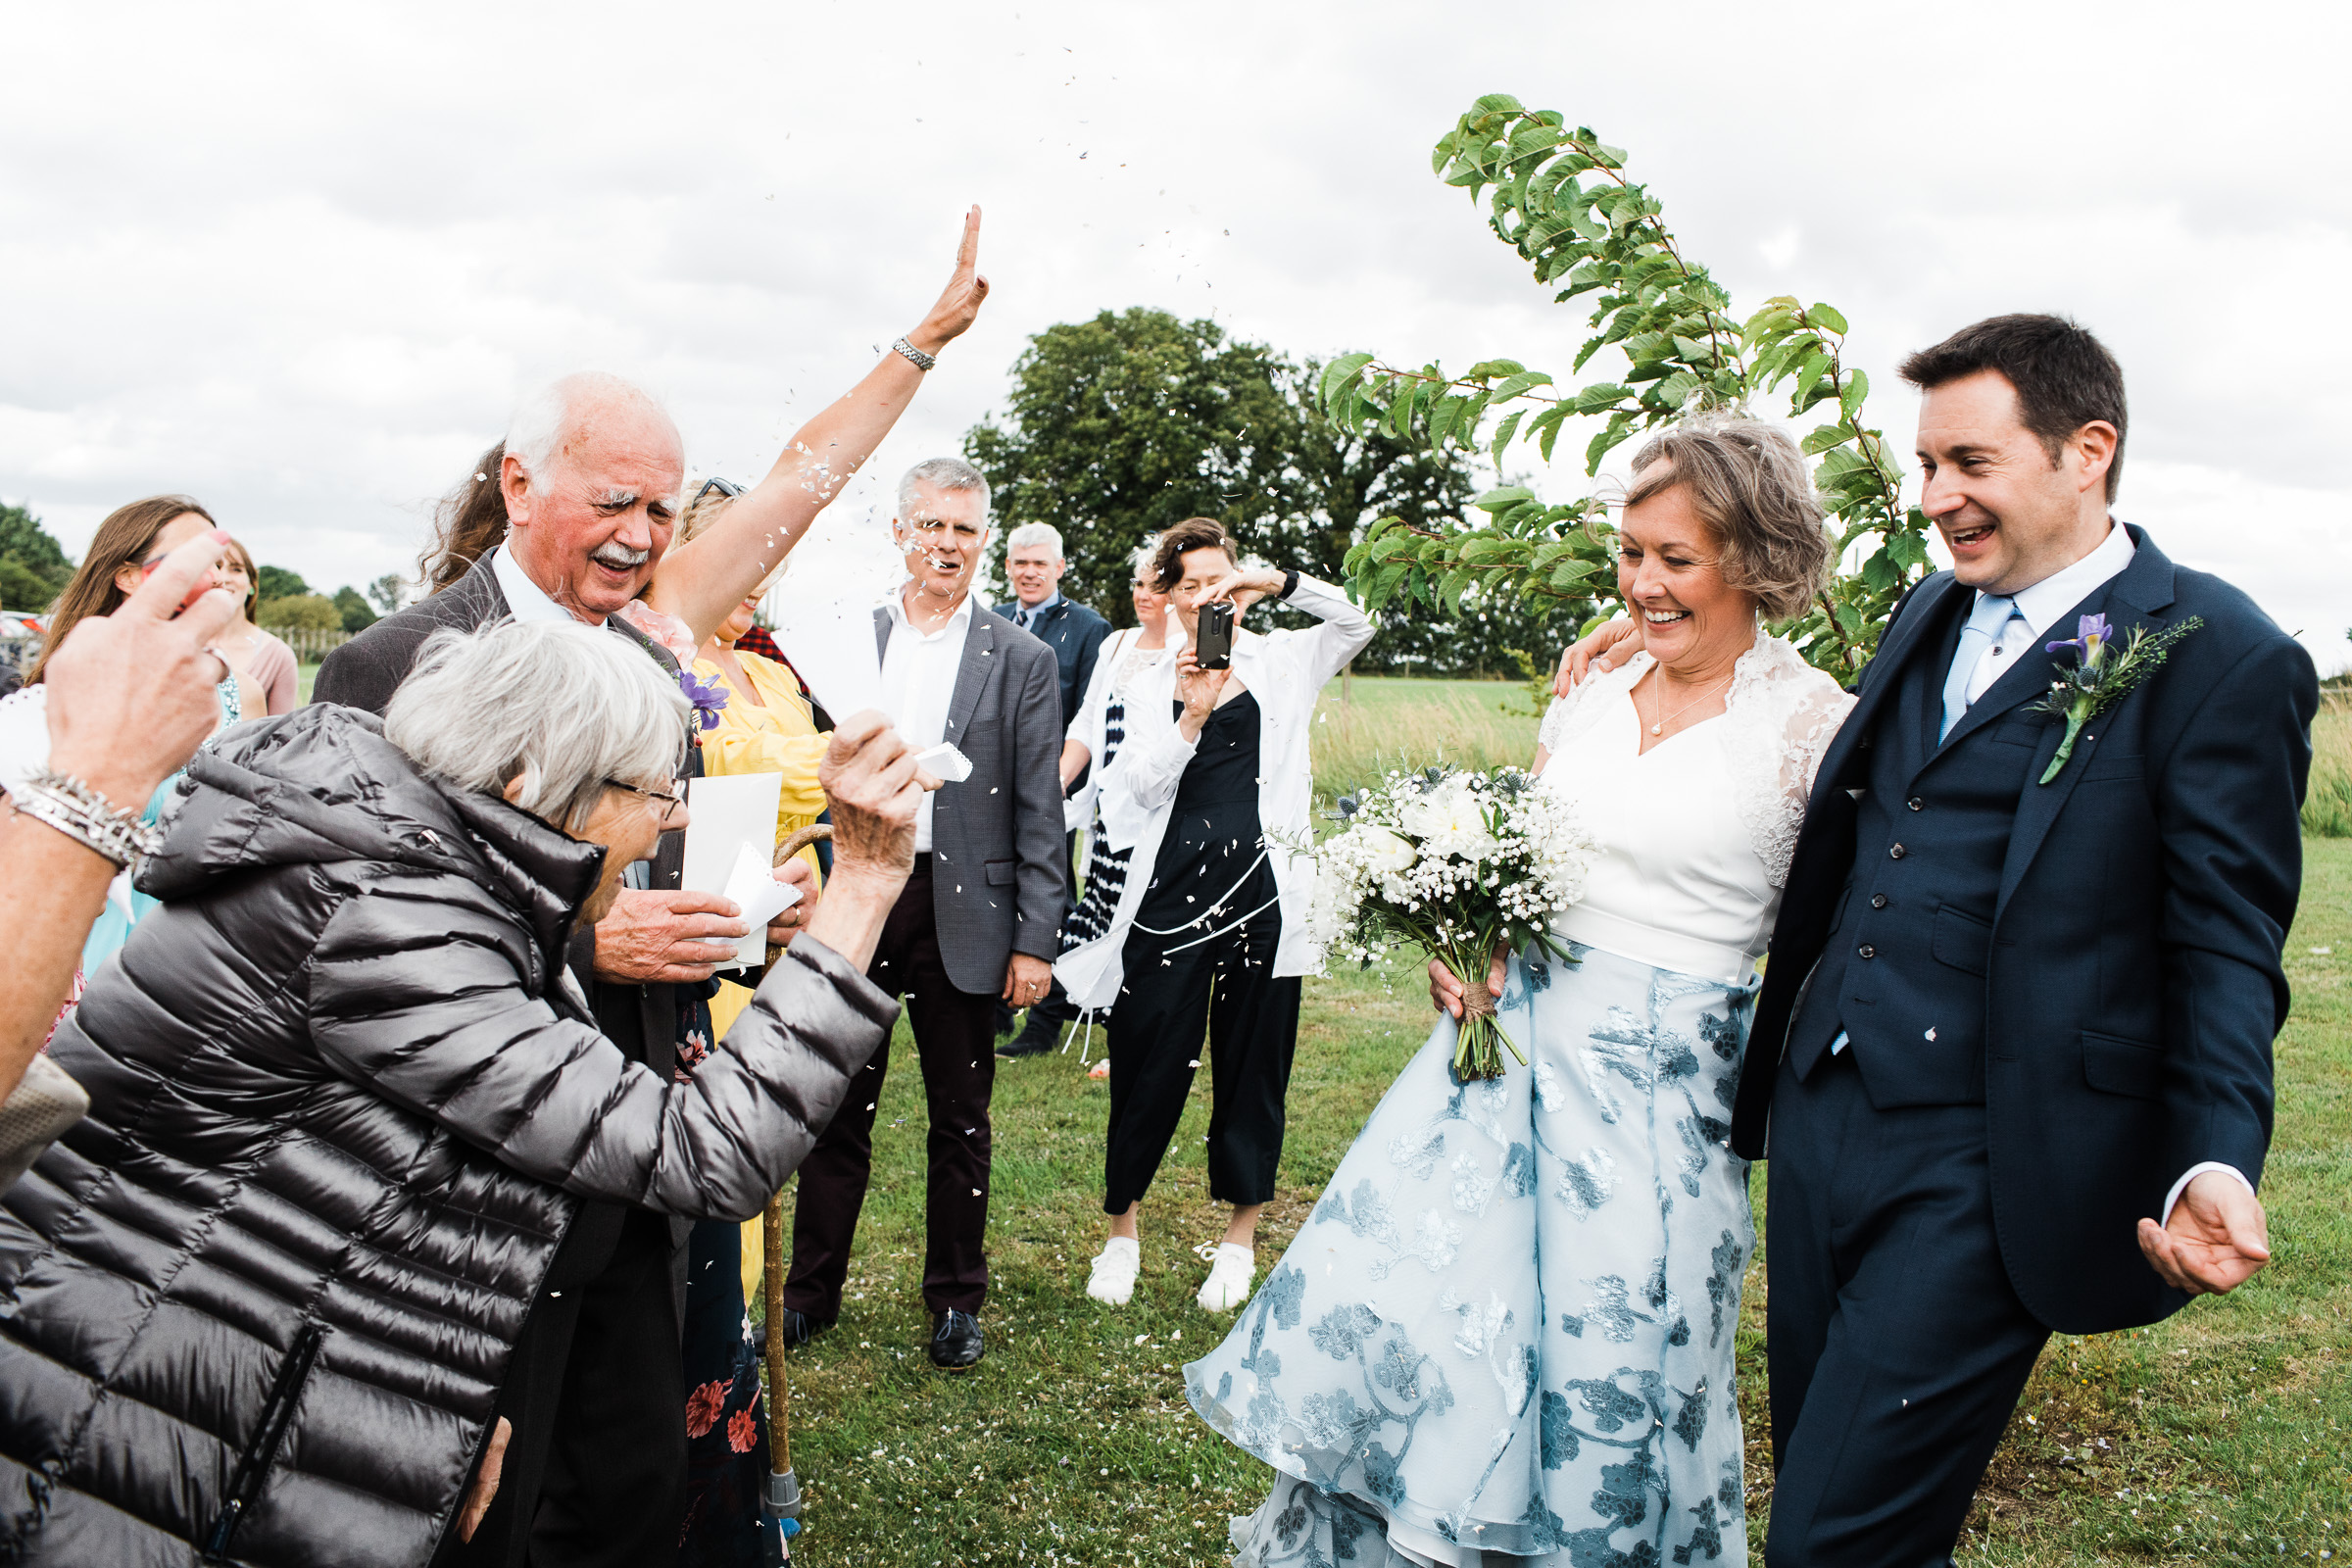 Wedding guests throw confetti at bride and groom. They are outside at Alpheton Hall Barns.